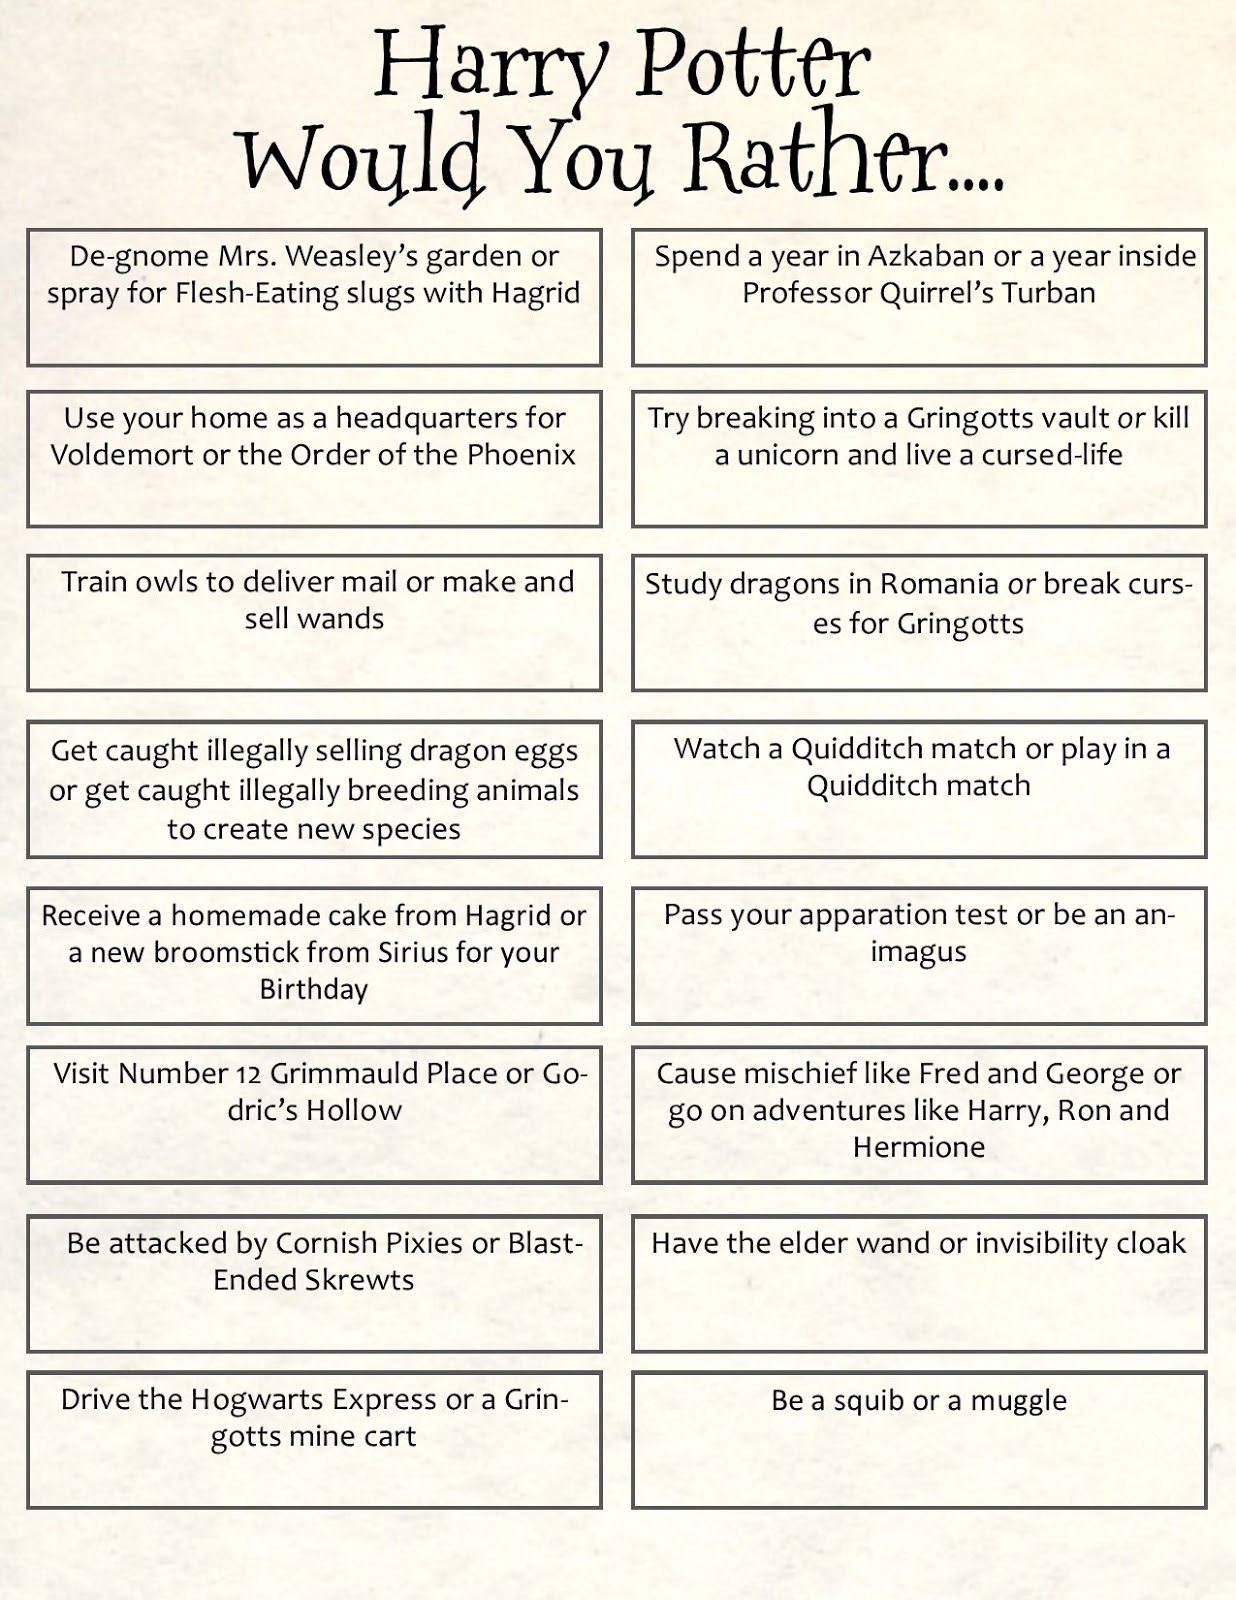 Harry Potter Trivia Questions With Answers